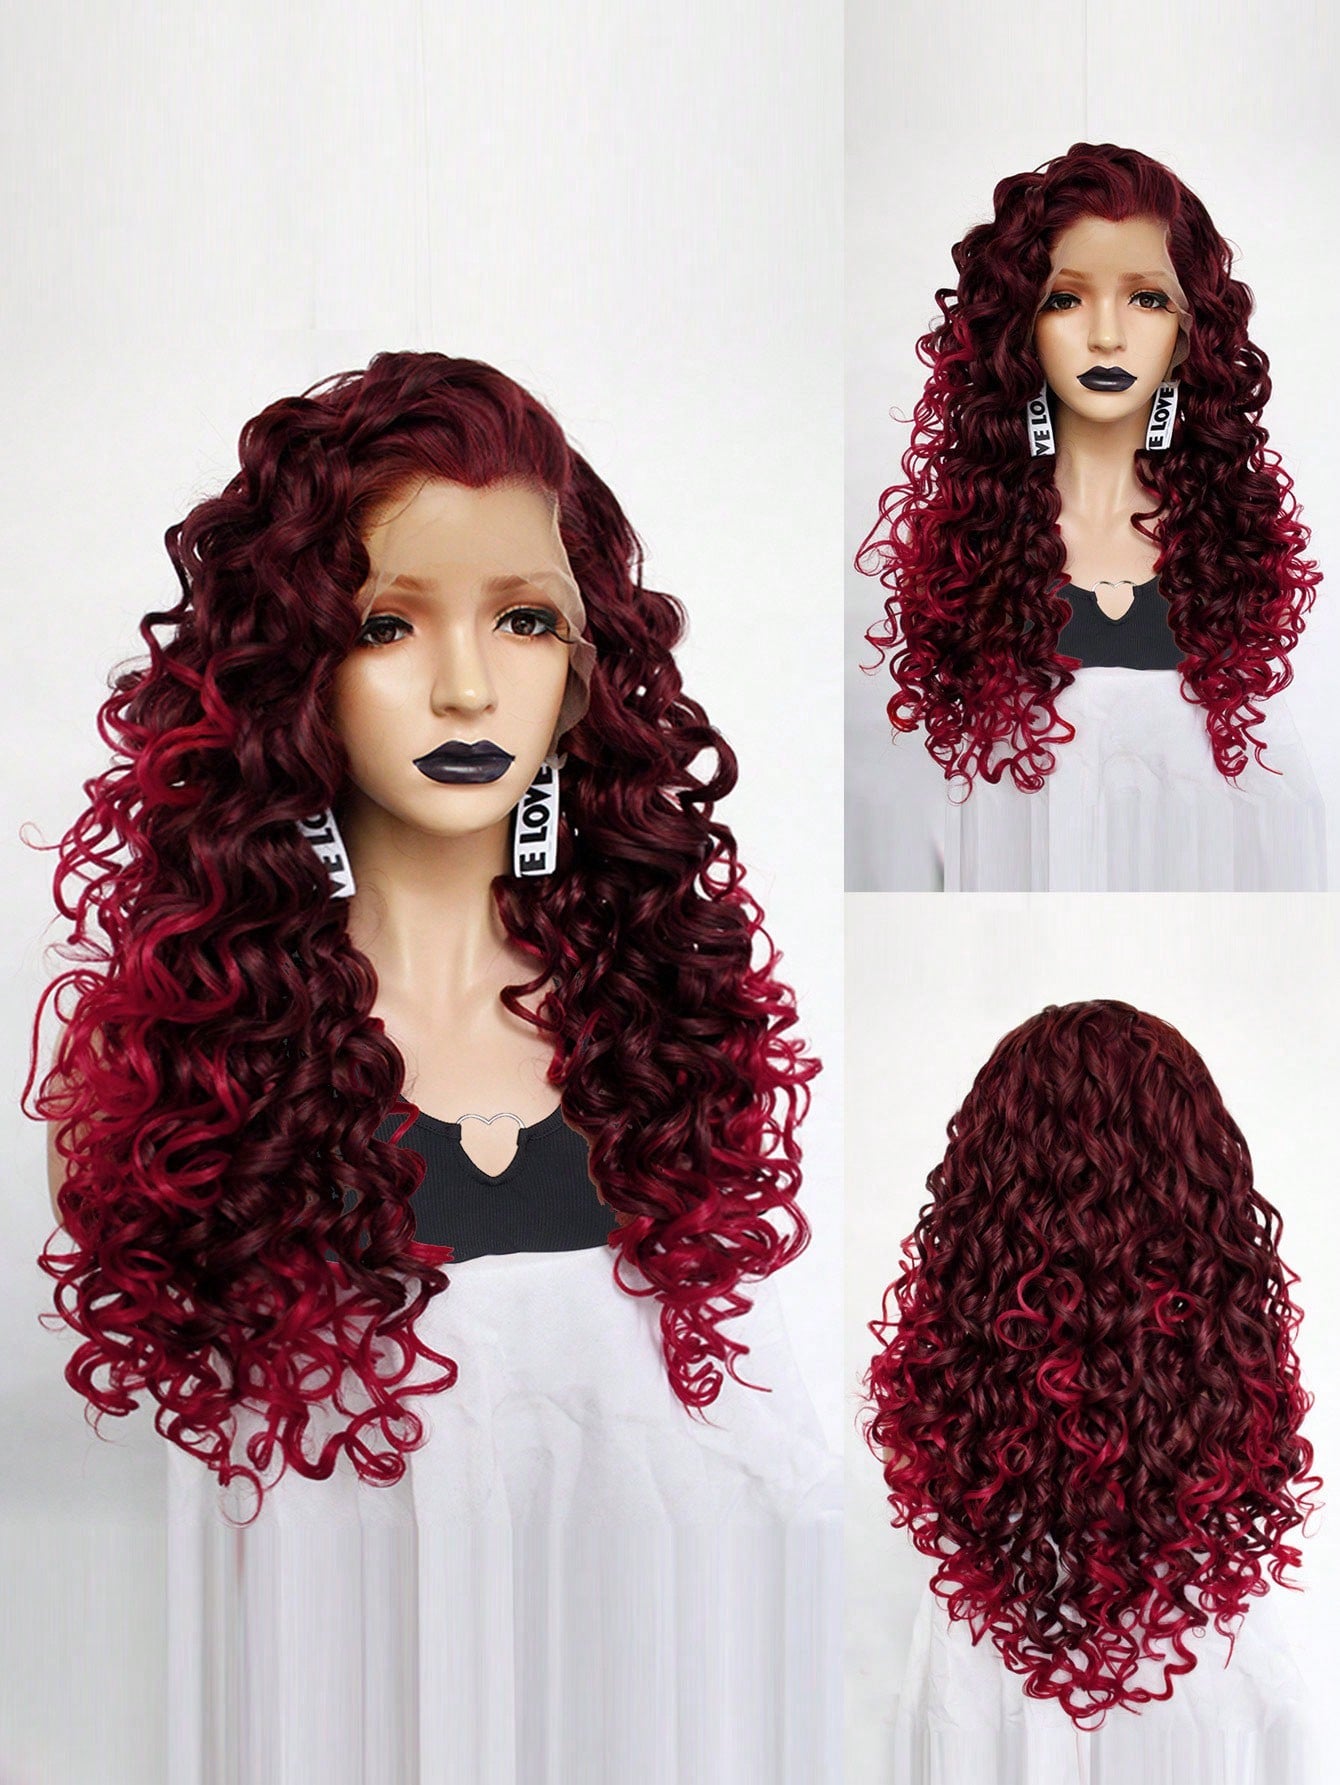 13*2 Big Bouffant Spiral Curly Ombre Red Long Free Part Natural Looking Synthetic Glueless Heat Resistant Soft Fiber Hair High Density Lace Front Wig for Fashionable Sexy Women Daily Party Use School Halloween Christmas Thanksgiving Day Costume Accessorie